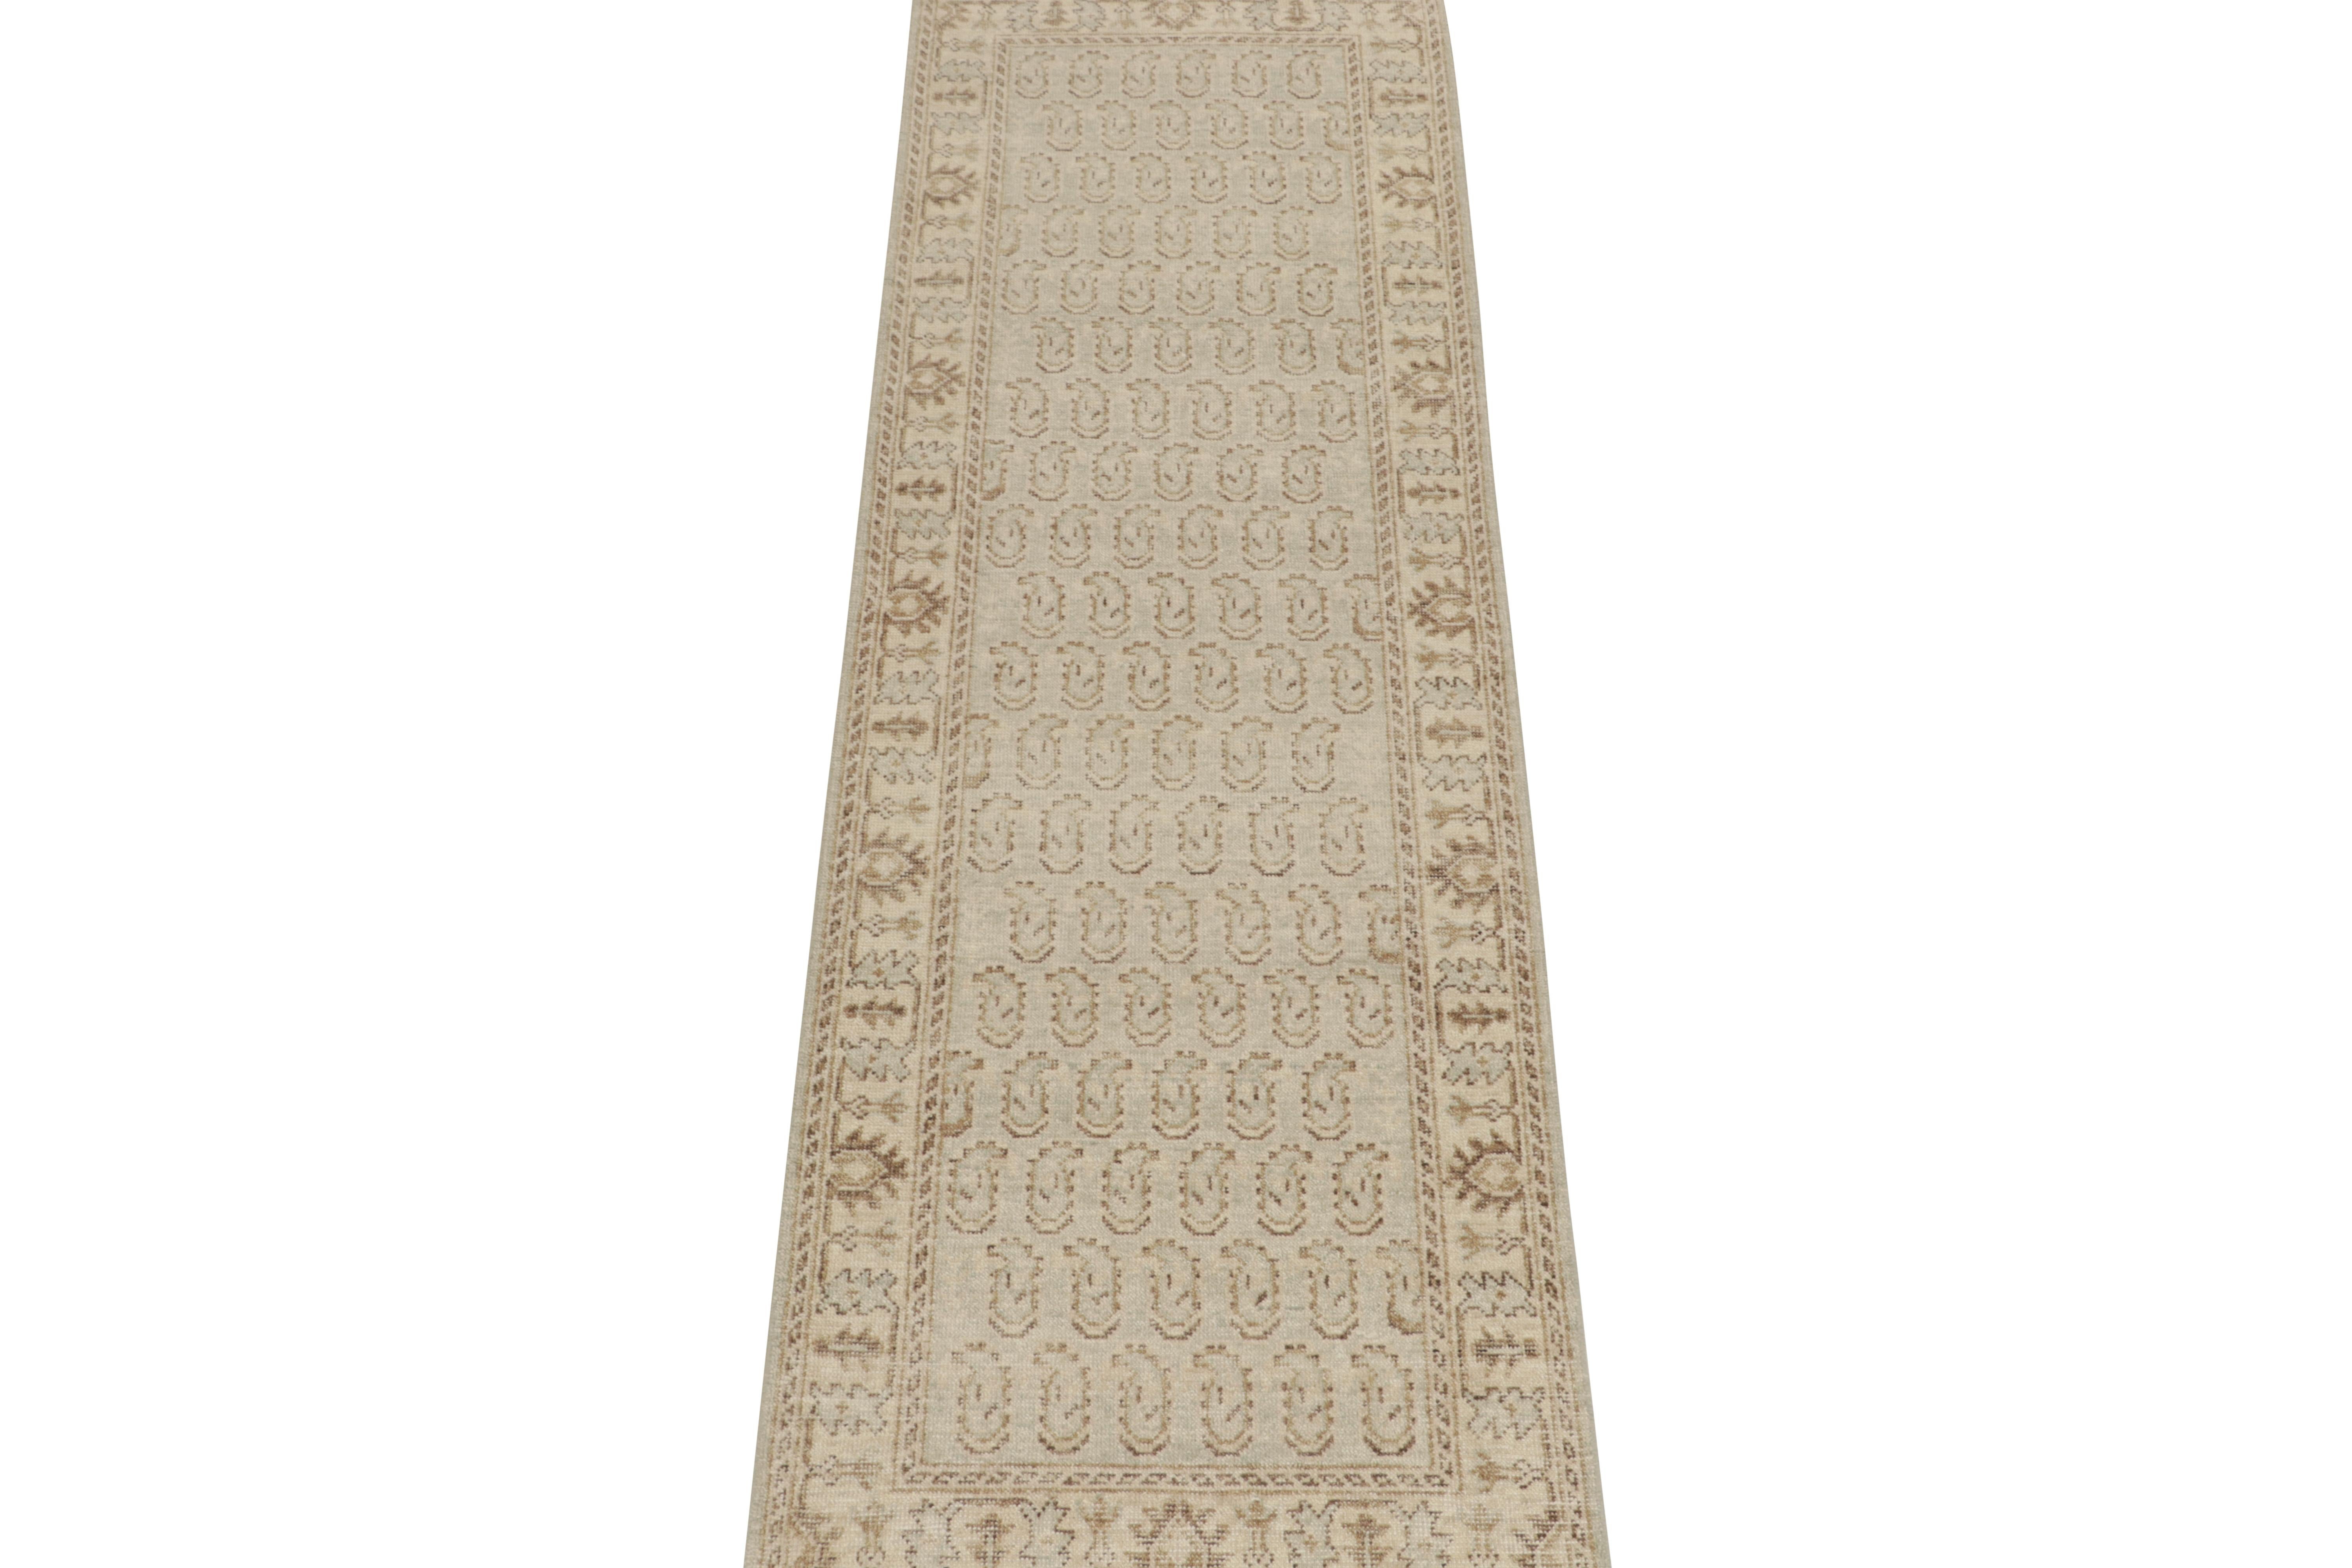 Indian Rug & Kilim’s Tribal Style Runner in Blue with Beige-Brown Paisley Patterns For Sale